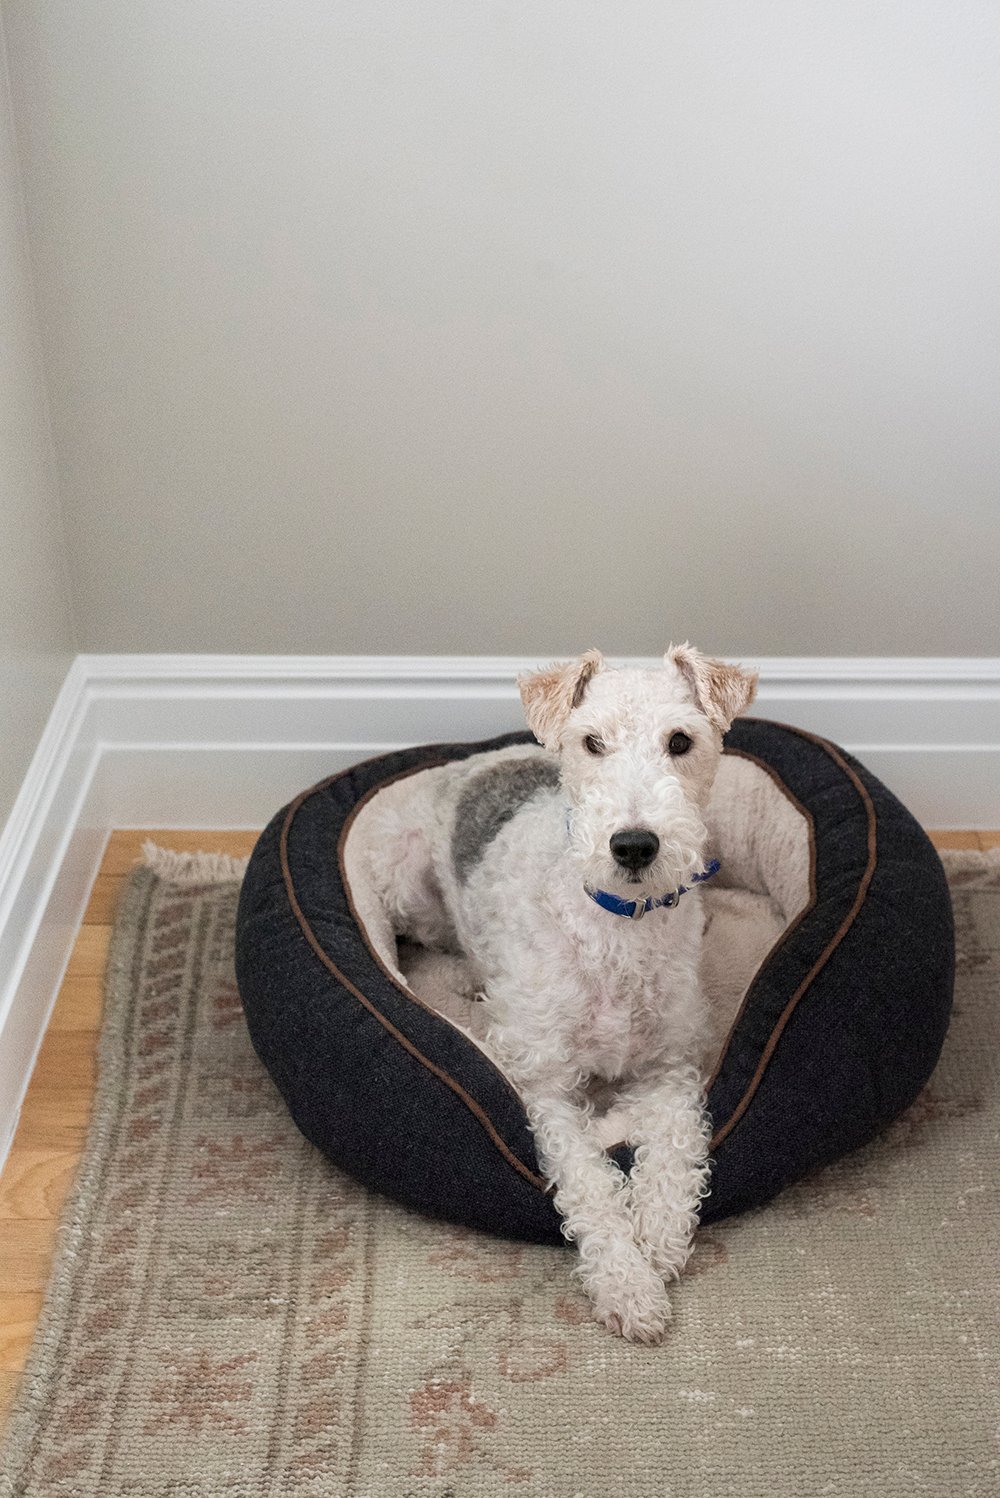 Amazon Finds : Dog Beds - roomfortuesday.com